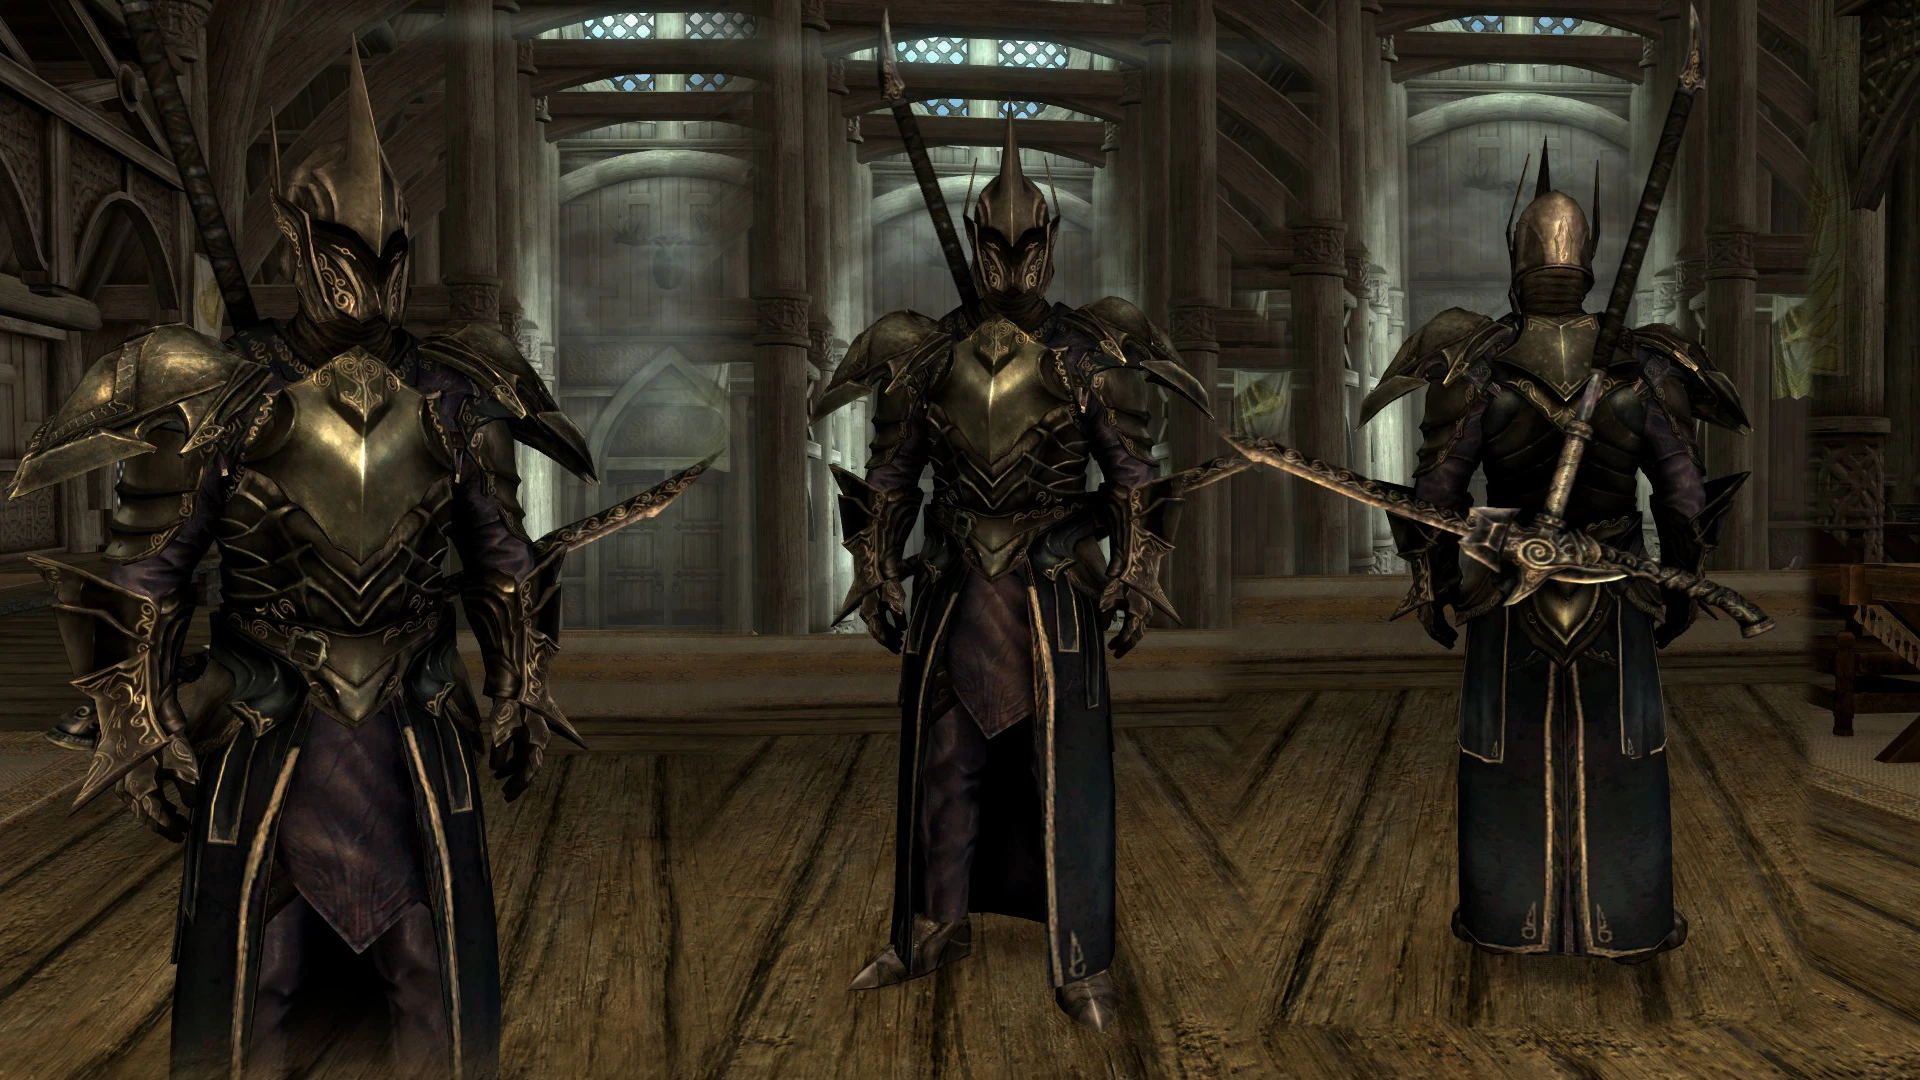 battle mage armour at skyrim special edition nexus mods.